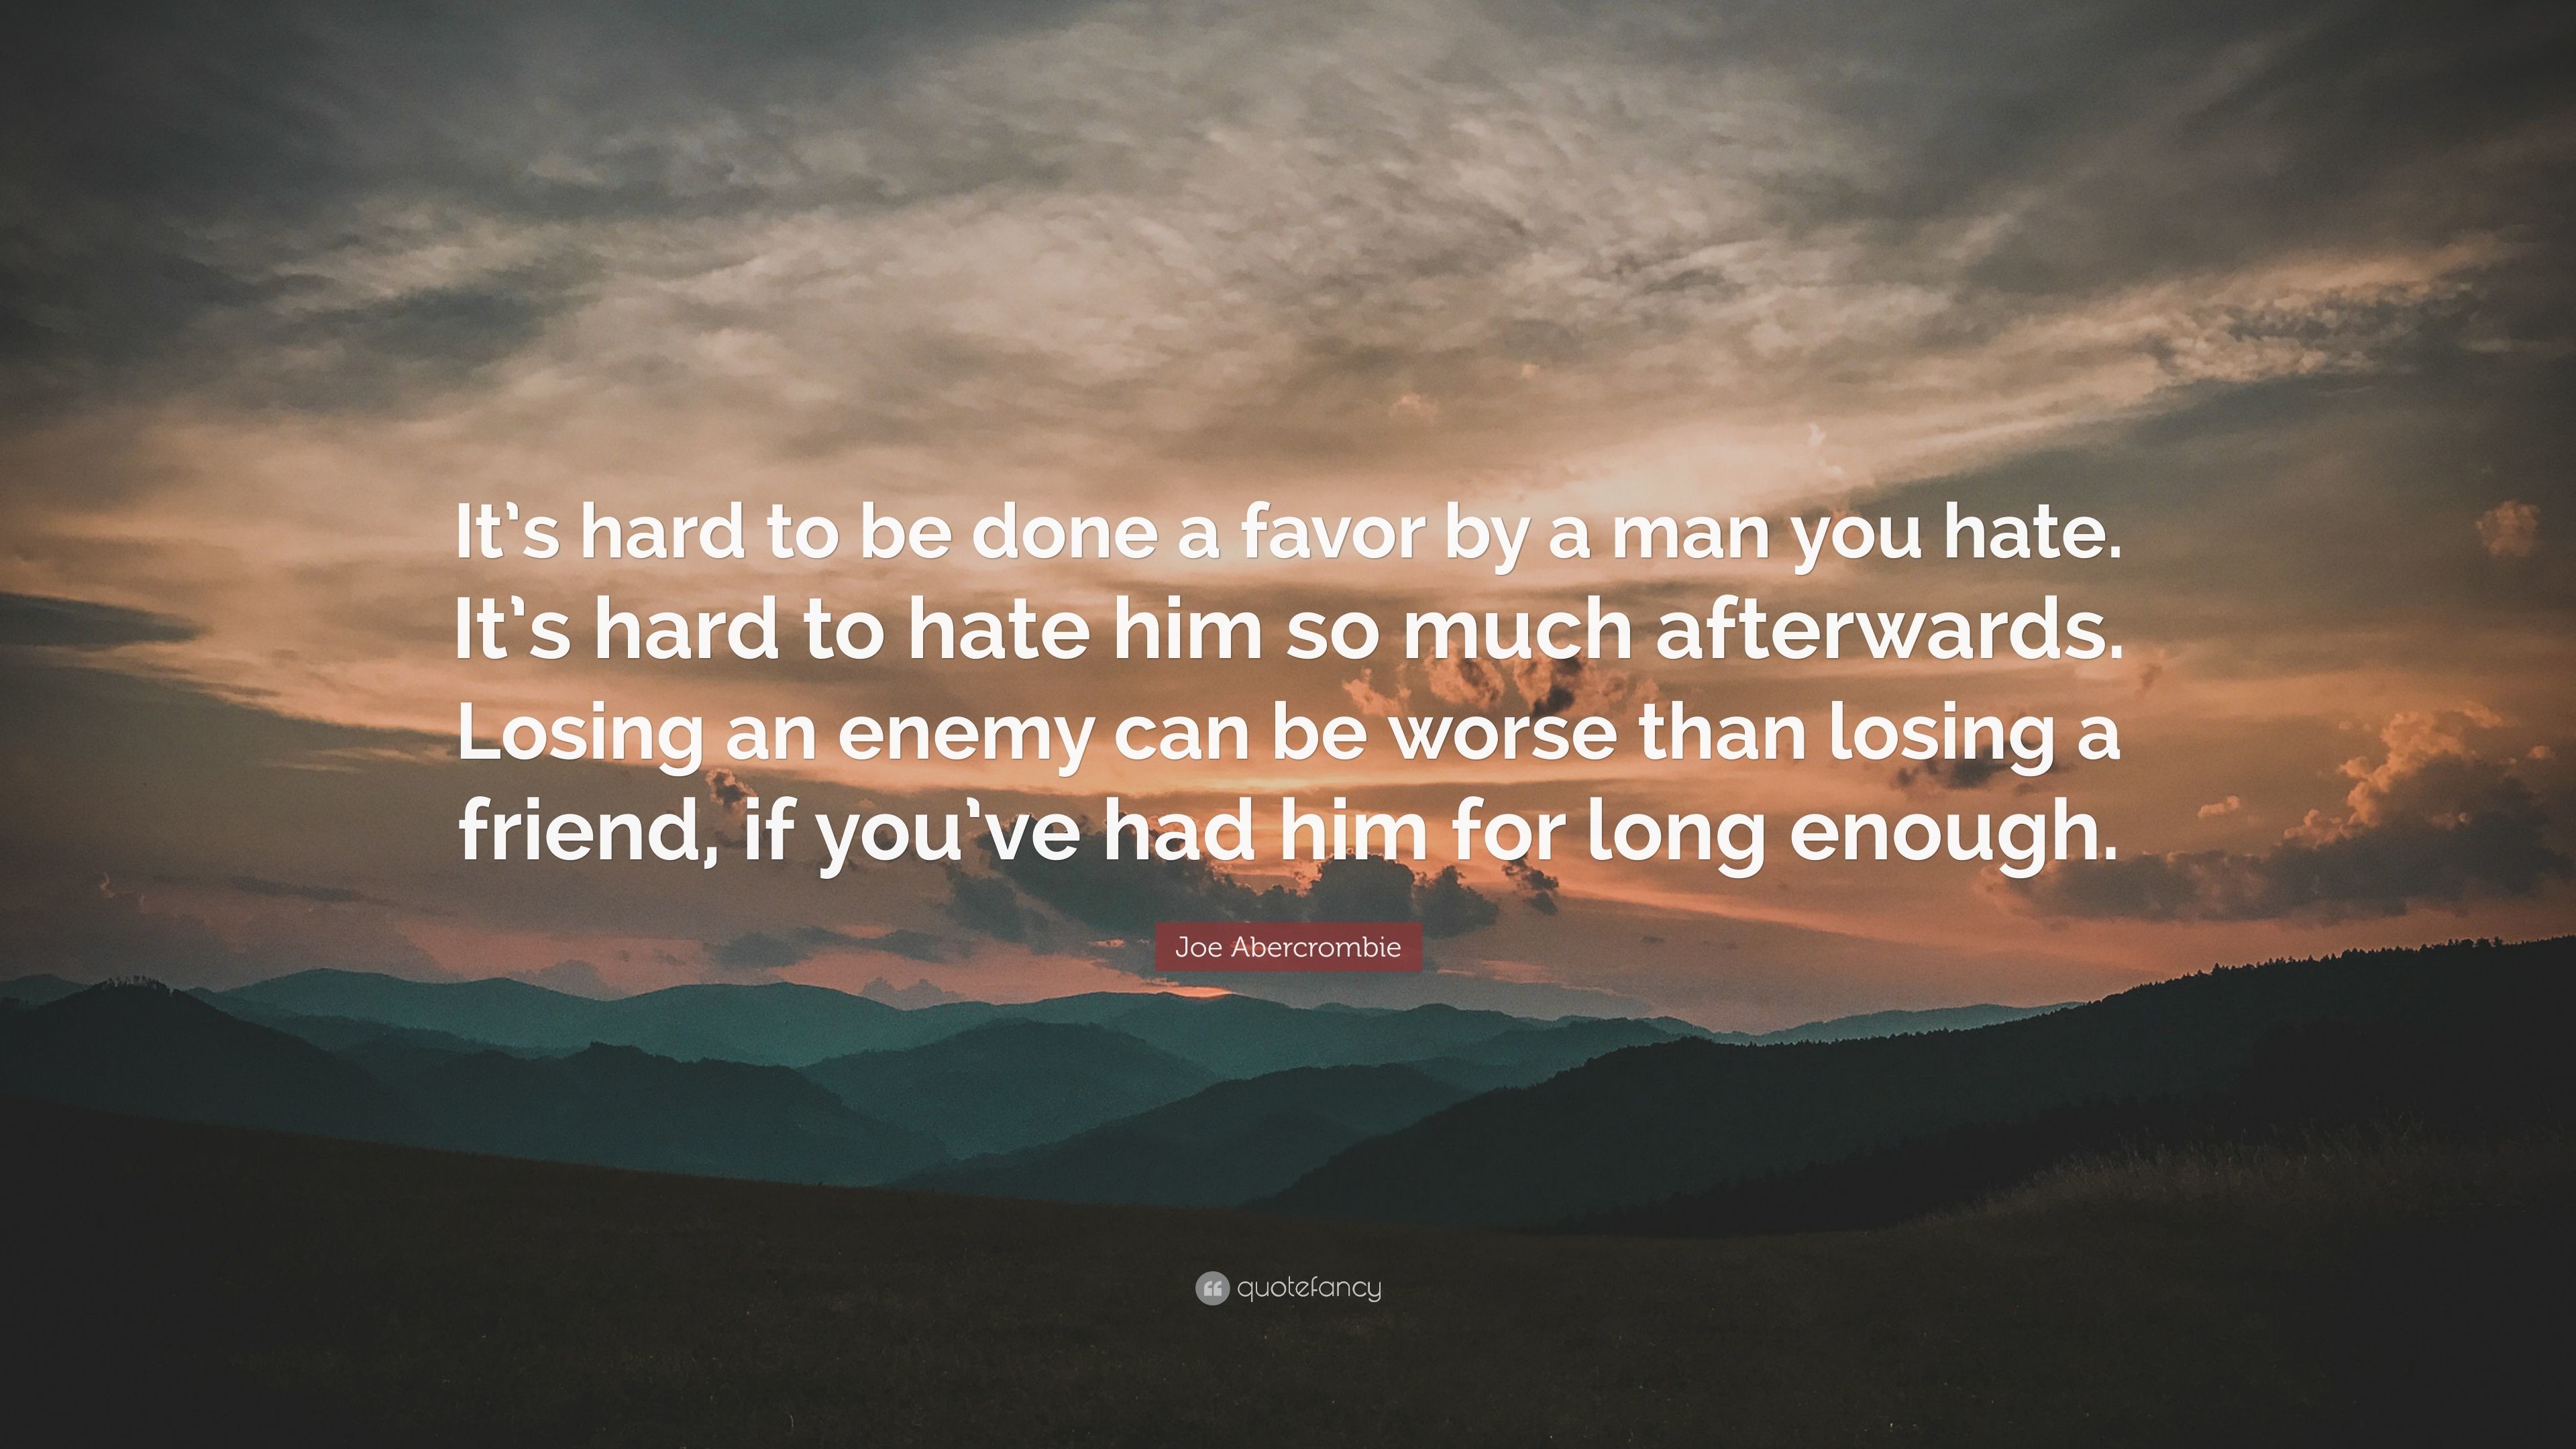 3840x2160 Joe Abercrombie Quote: “It's hard to be done a favor by a man you